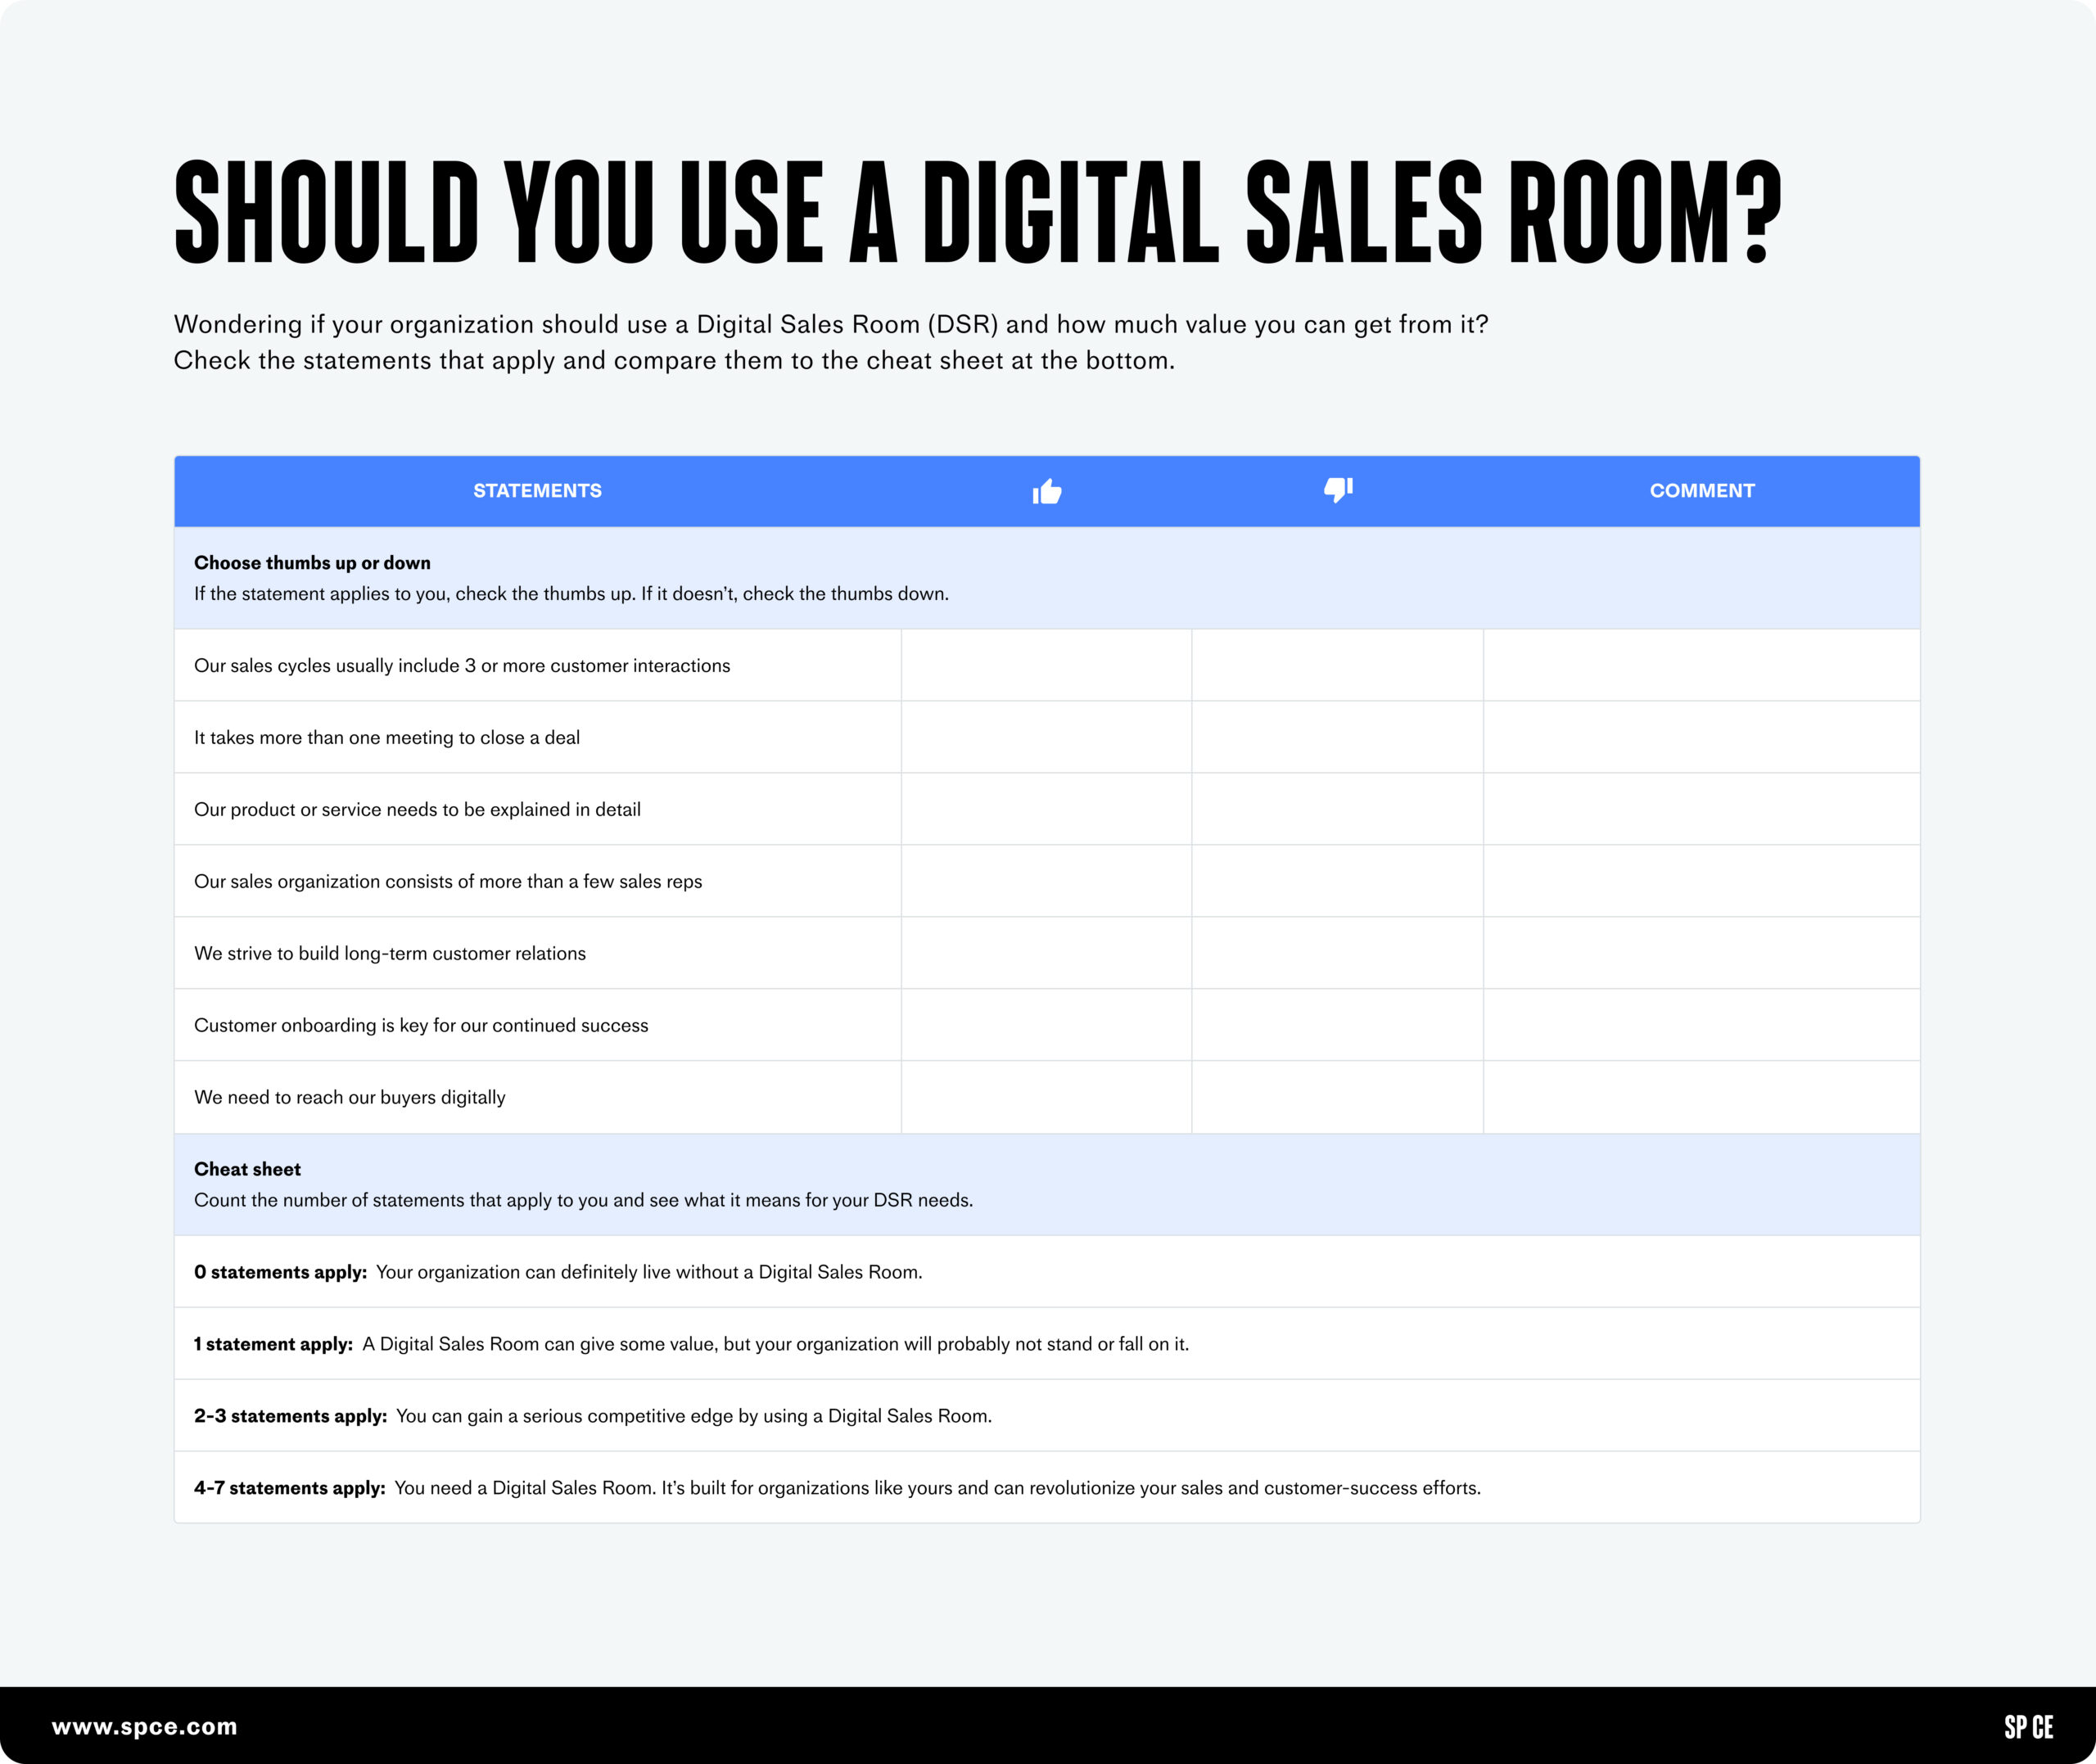 Digital sales room checklist that lets yous ee how much value a digital sales room can give you